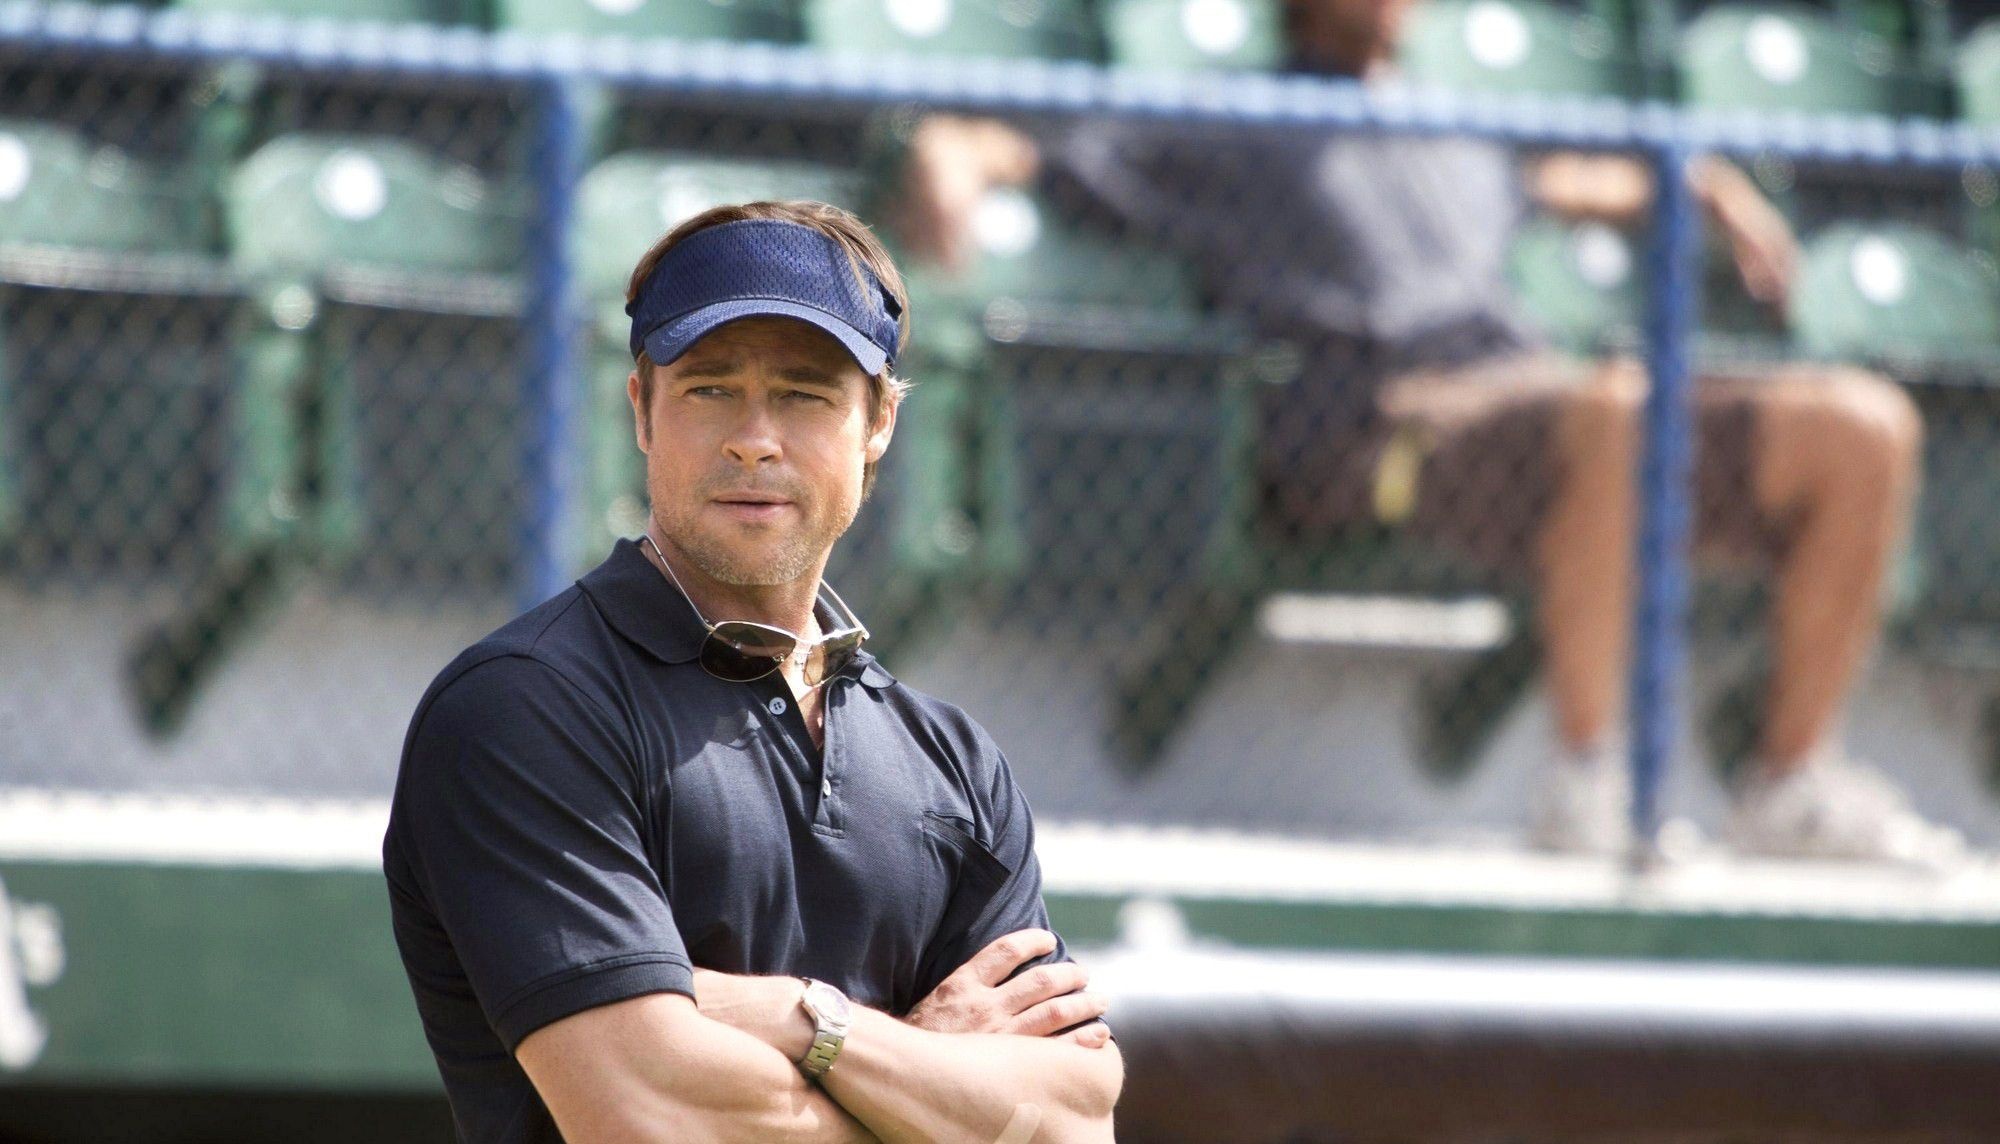 Moneyball: The film follows Oakland Athletics' general manager Billy Beane's attempts to assemble a competitive team. 2000x1150 HD Wallpaper.